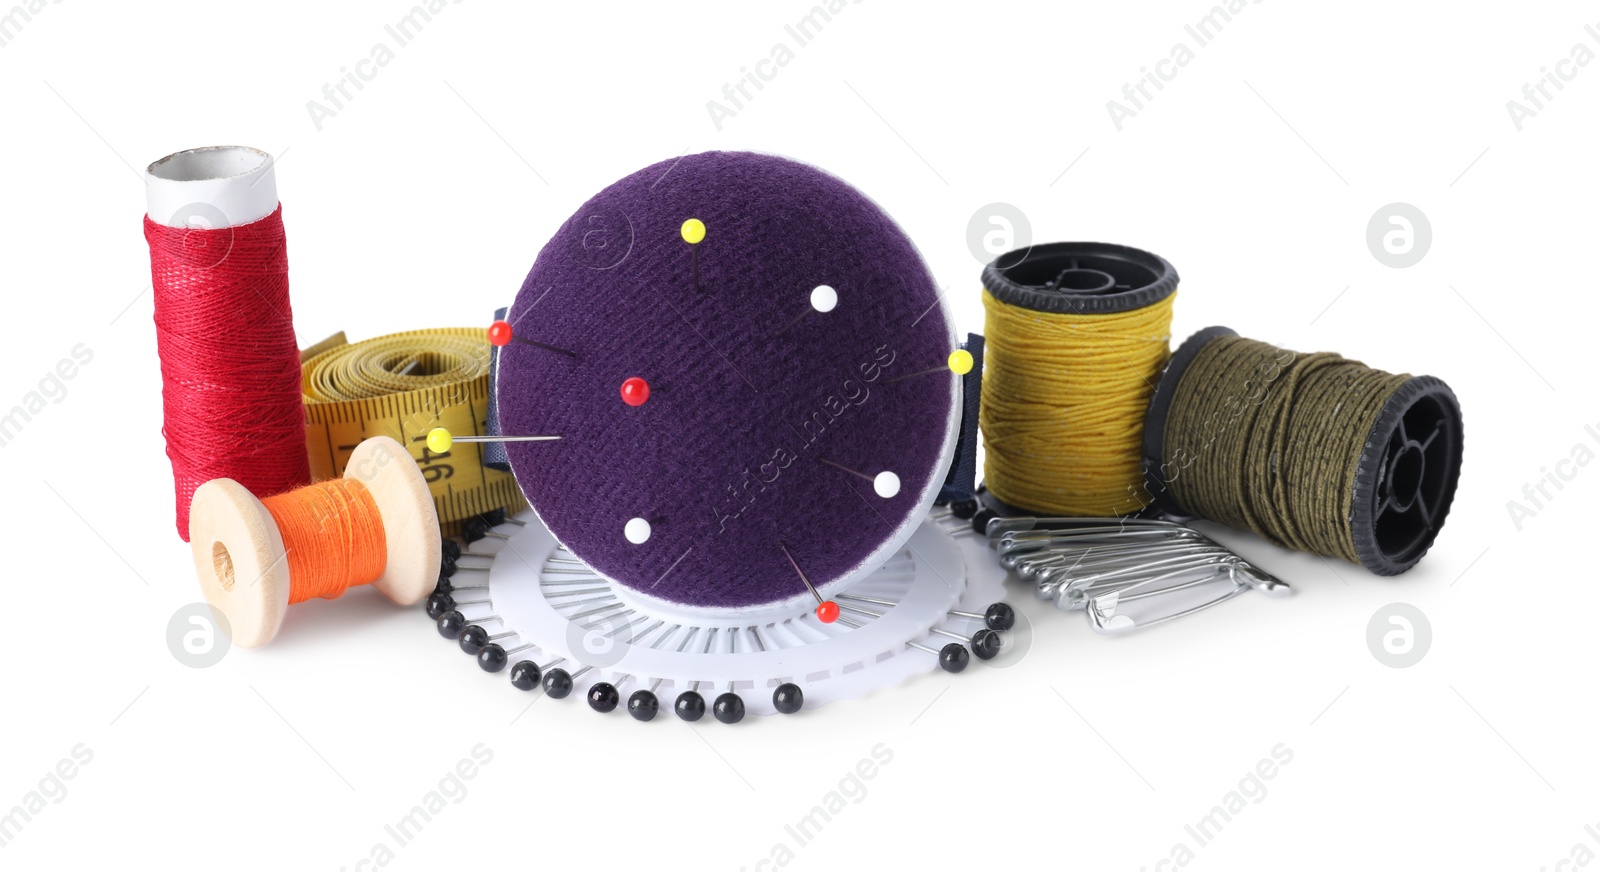 Photo of Pincushion, pins and other sewing tools isolated on white